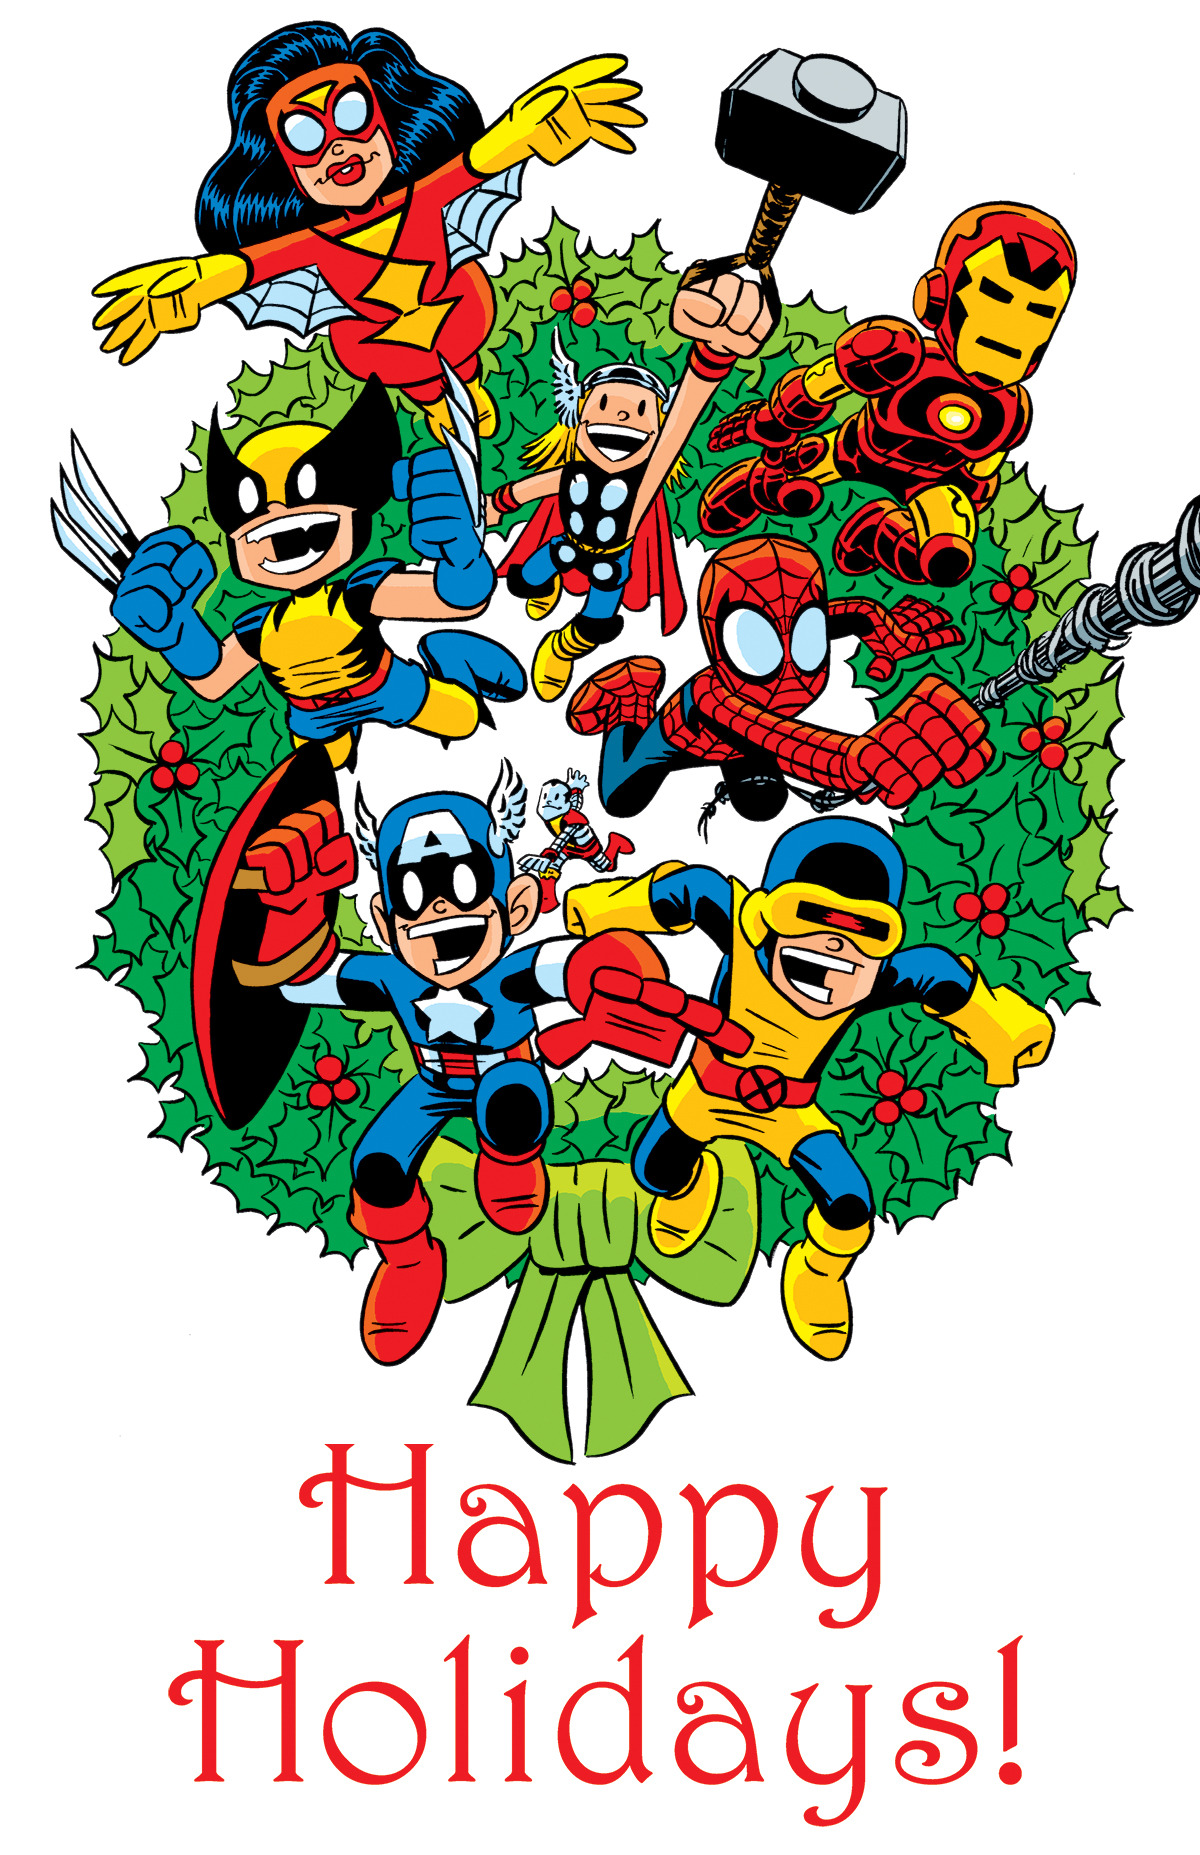 Merry Christmas from The Marvel Project! - The Marvel Project